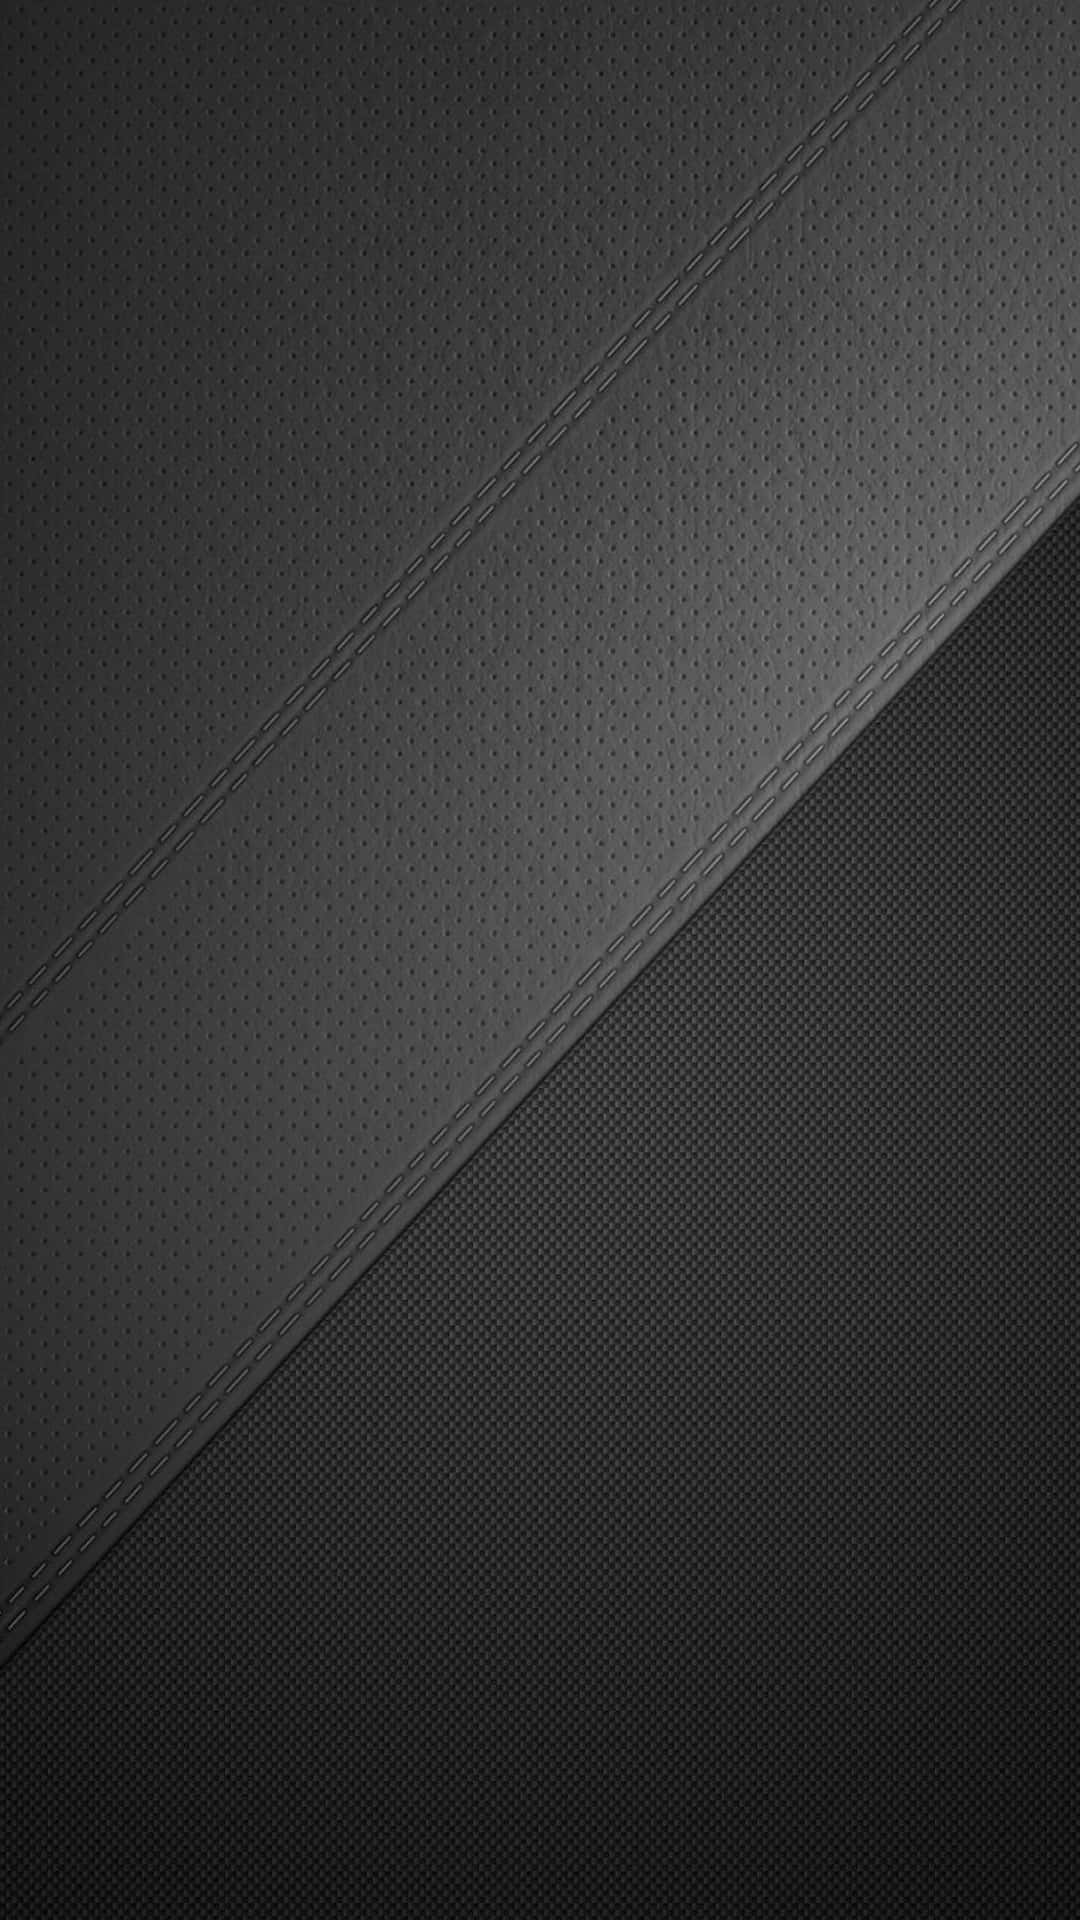 Luxurious Gray and Black Leather Texture Wallpaper